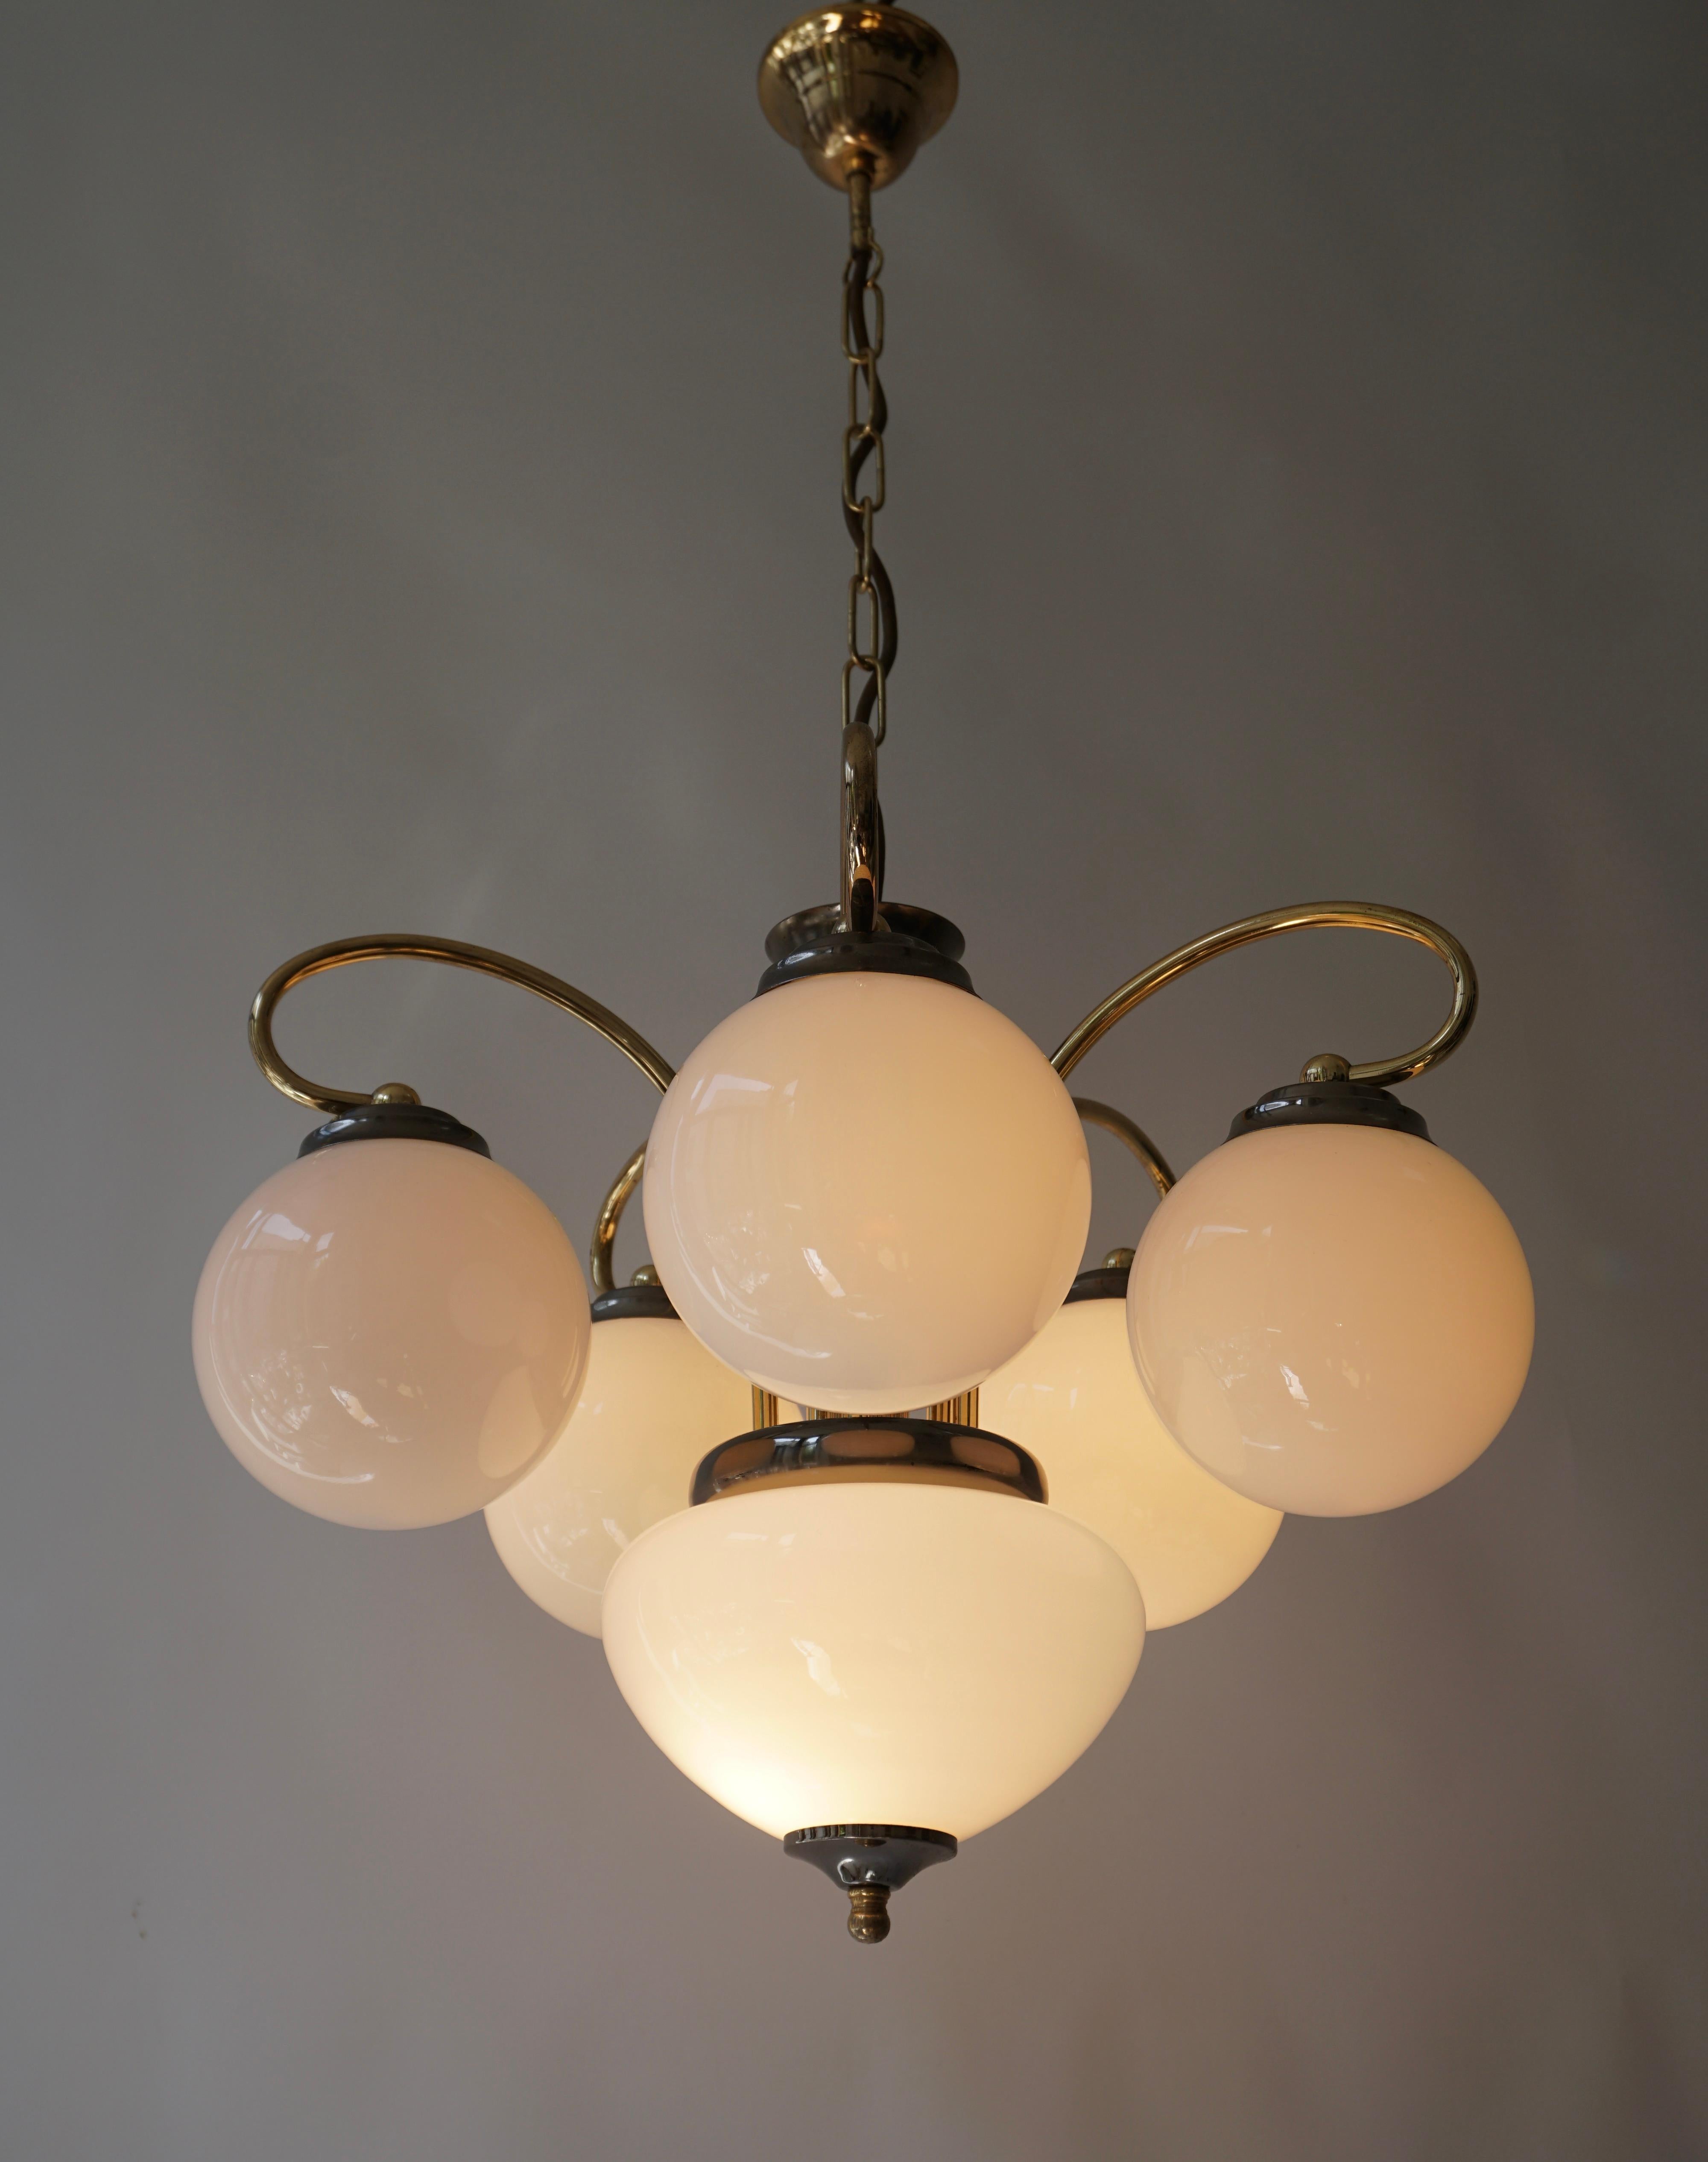 Elegant chandelier in brass and opal glass, Italy, 1970s.   

This elegant chandelier has six shades in opal glass, with a wonderful warm light spread. The tubular brass frame shows five elegantly curved mounting elements, holding the shades. All